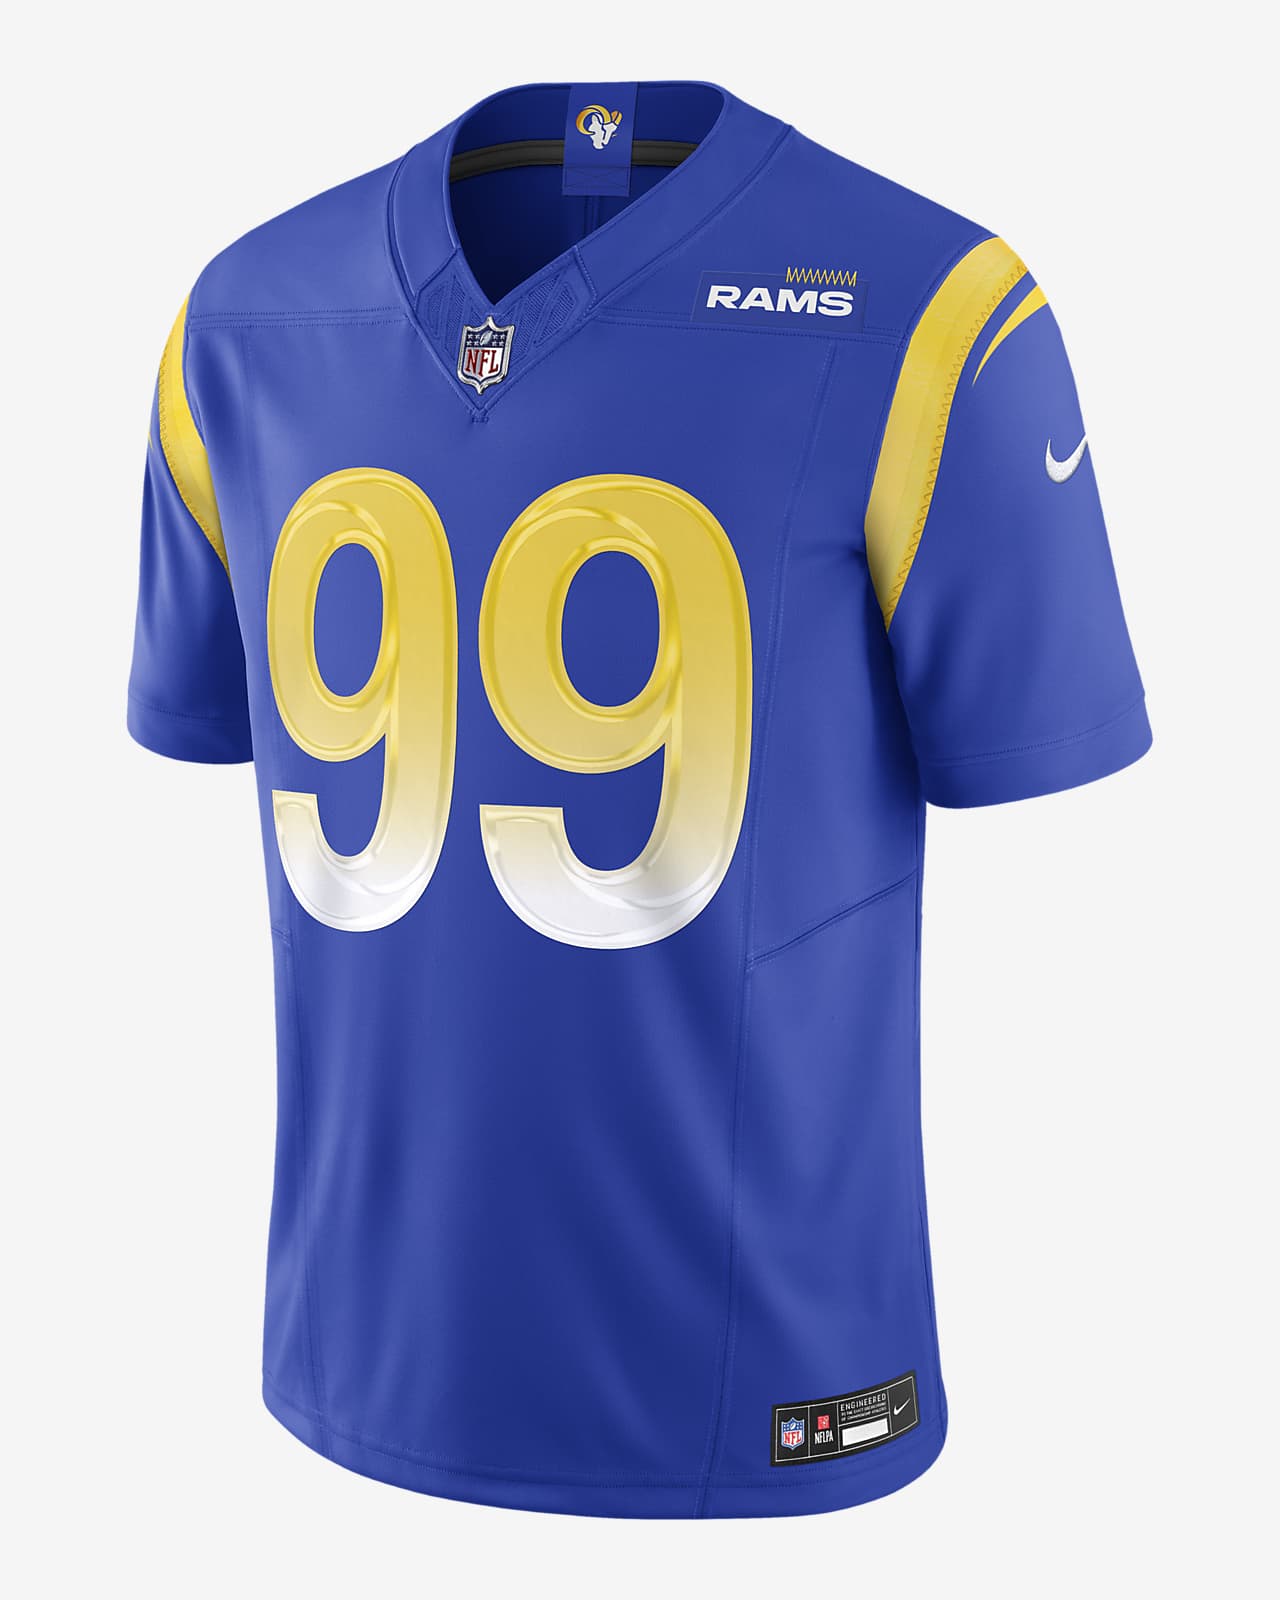 rams jersey today